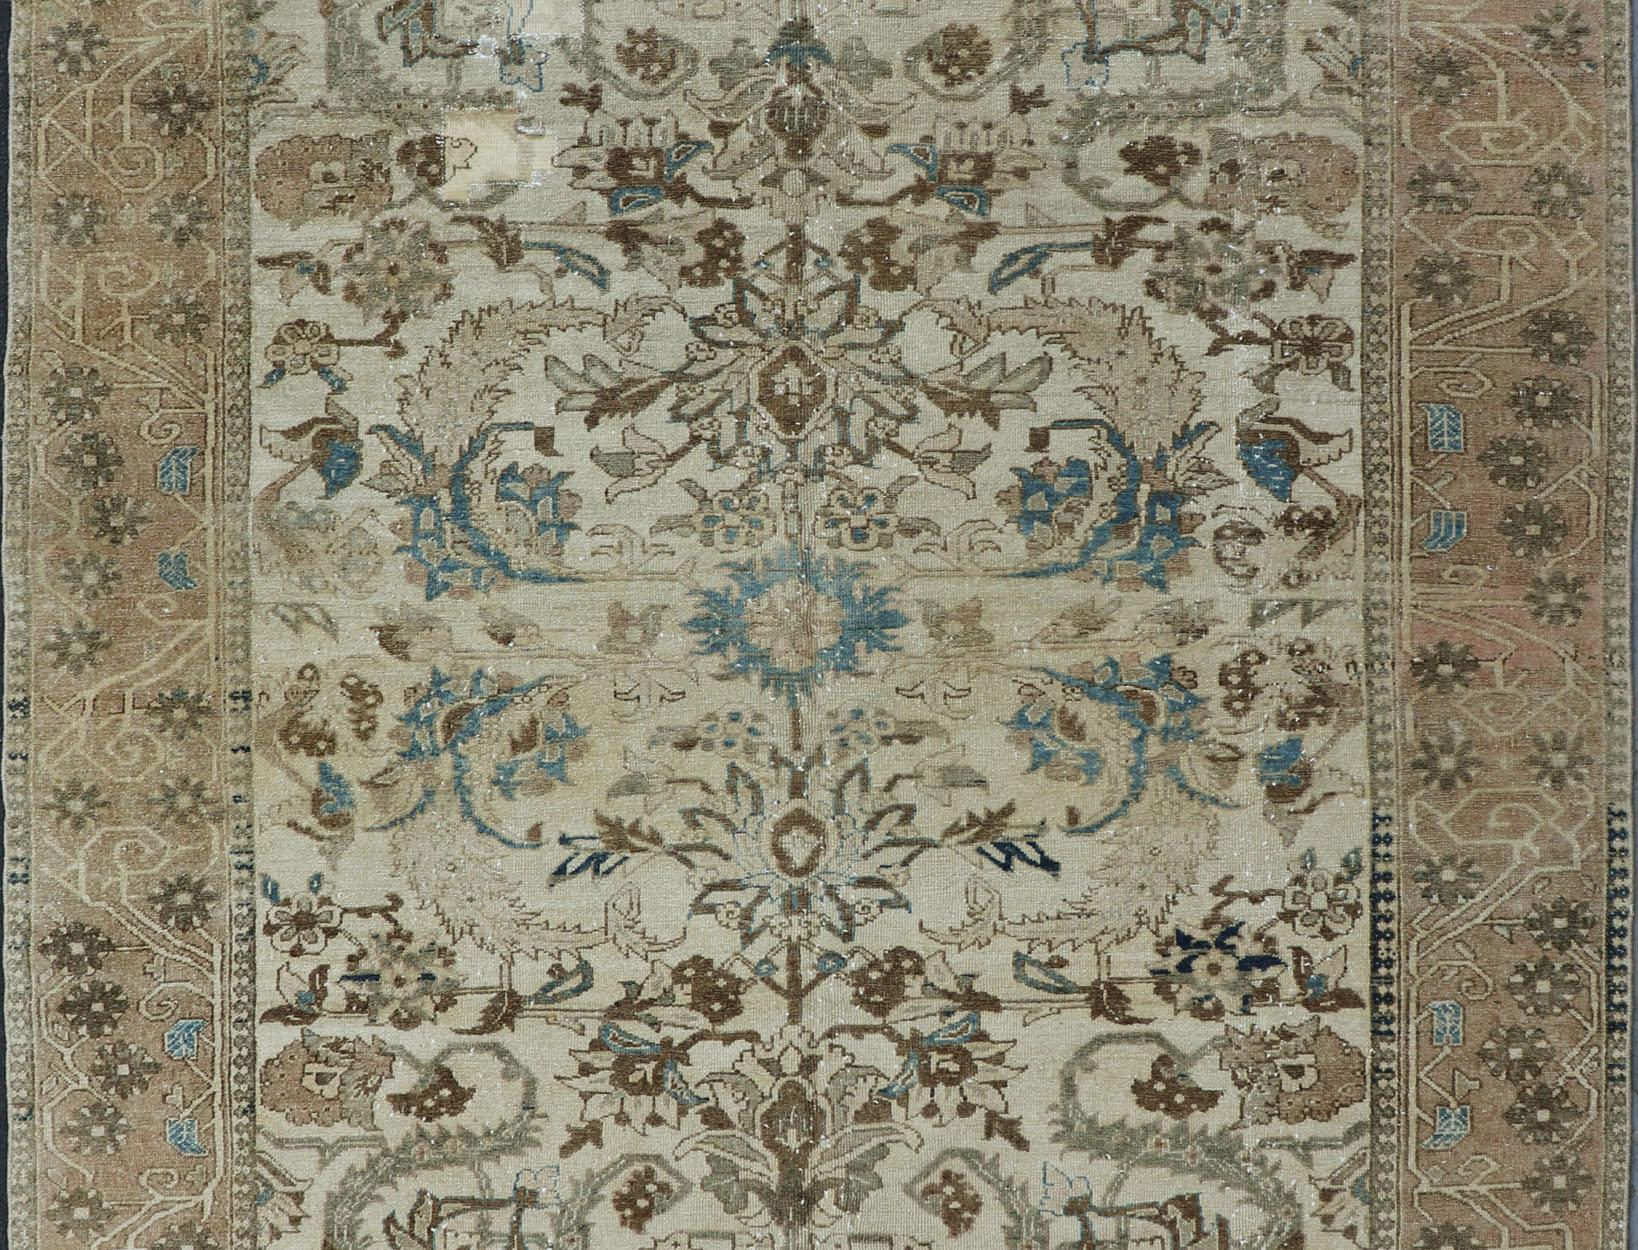 Vintage Persian Bakhtiari rug with all-over blossom design in earth tones, rug PA-1052-ks, country of origin / type: Iran / Bakhtiari, circa 1930.

Persian Bakhtiari rugs are in fact tribal pieces that rely upon a repertoire of abstract geometric